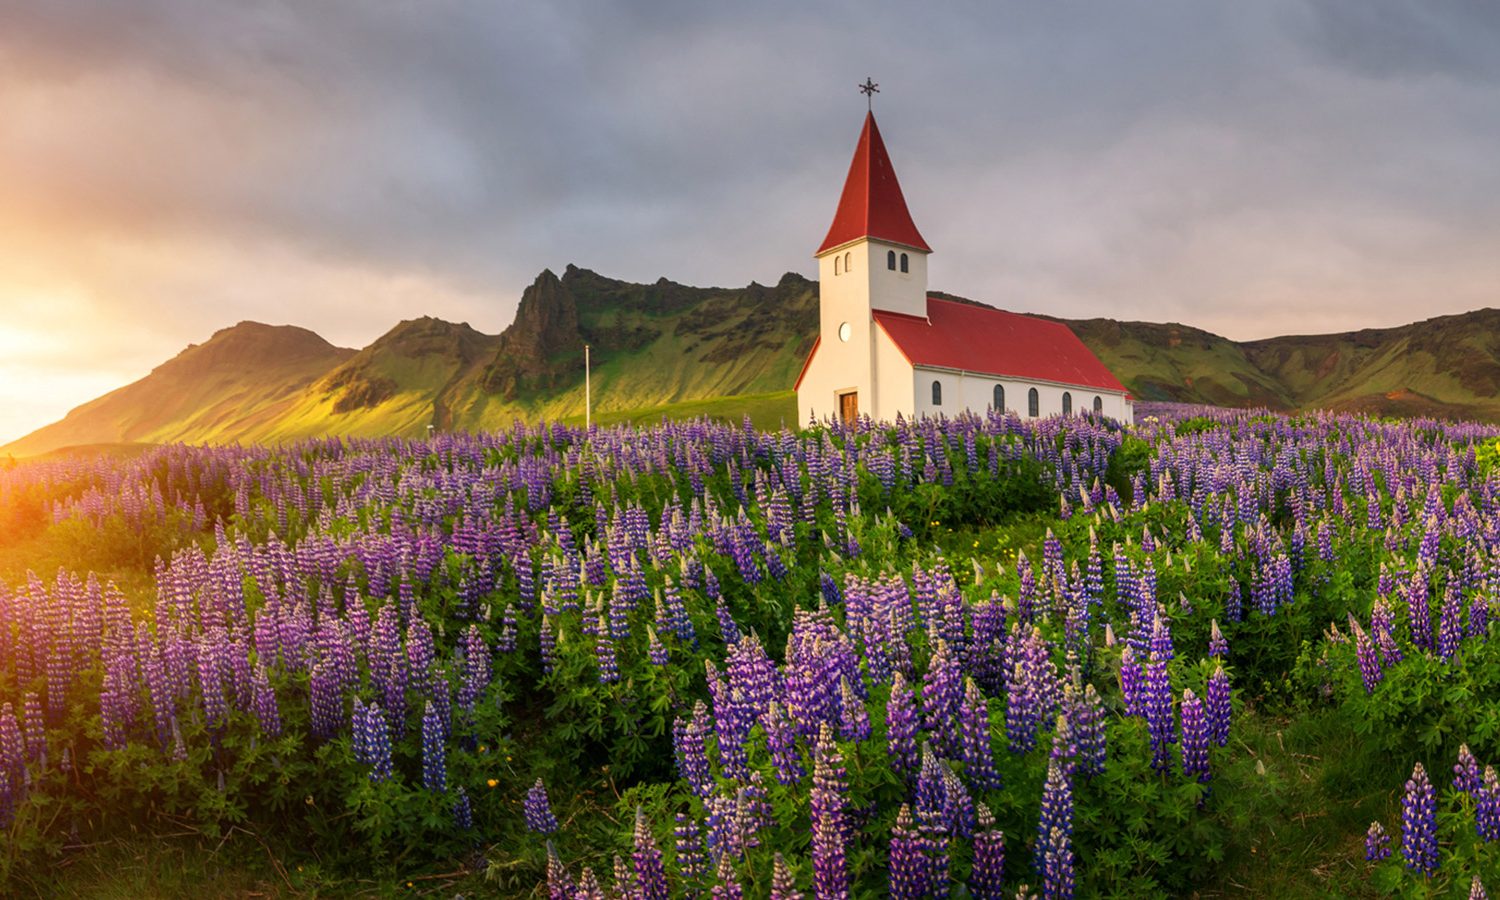 Iceland Photo Tour: Ring road during summer